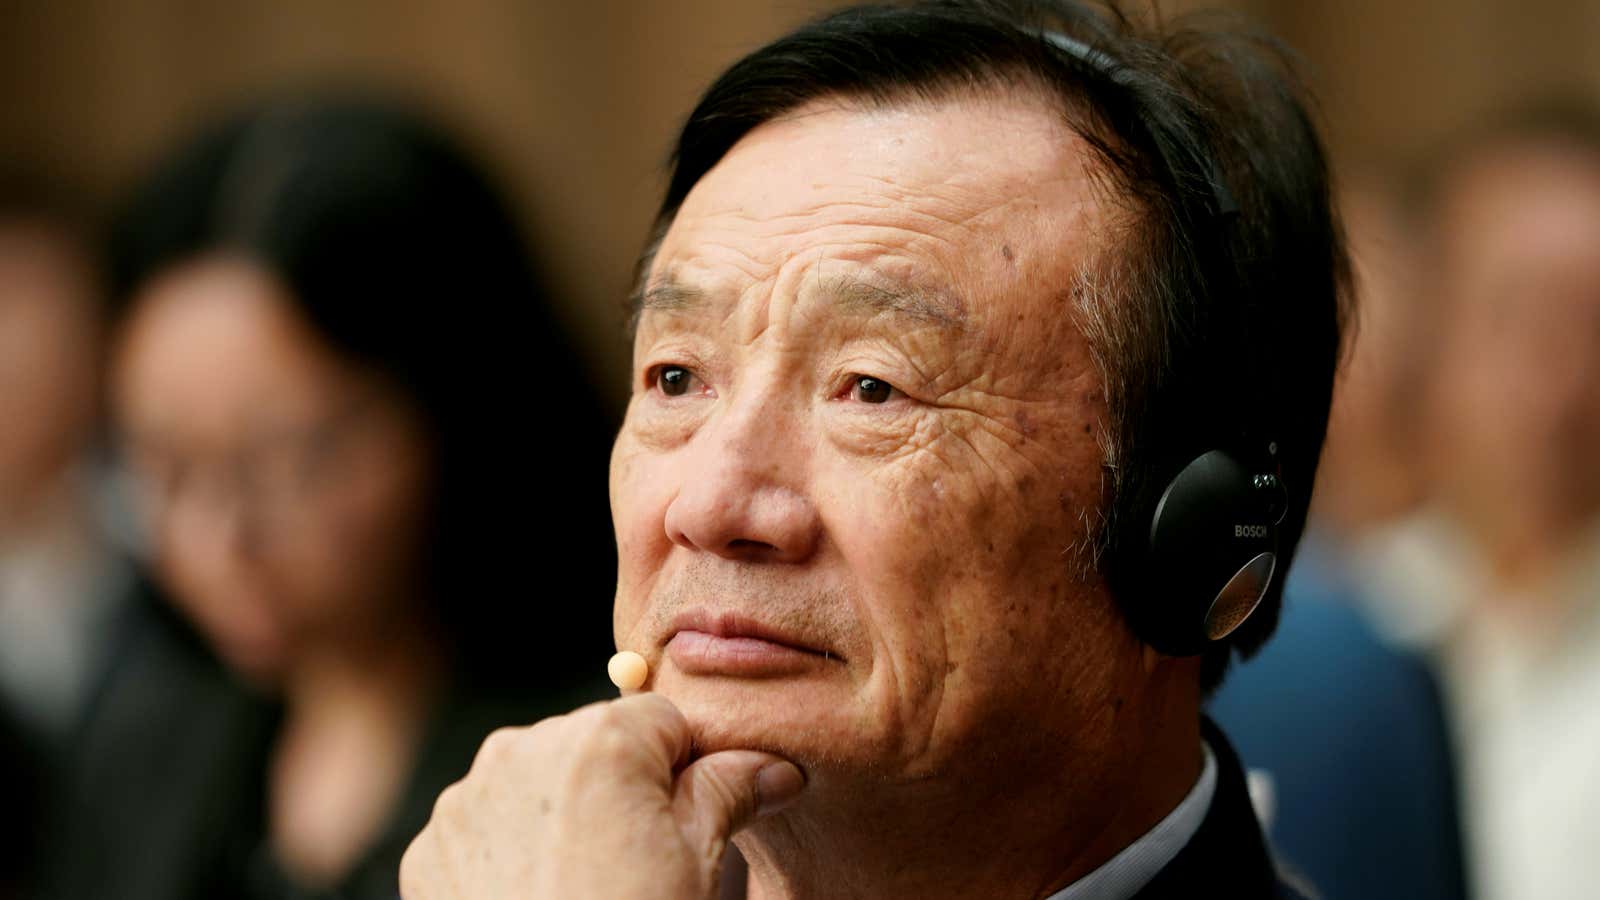 Huawei founder Ren Zhengfei attends a panel discussion at the company headquarters in Shenzhen, Guangdong province, China June 17, 2019. REUTERS/Aly Song – RC18FFA50C00